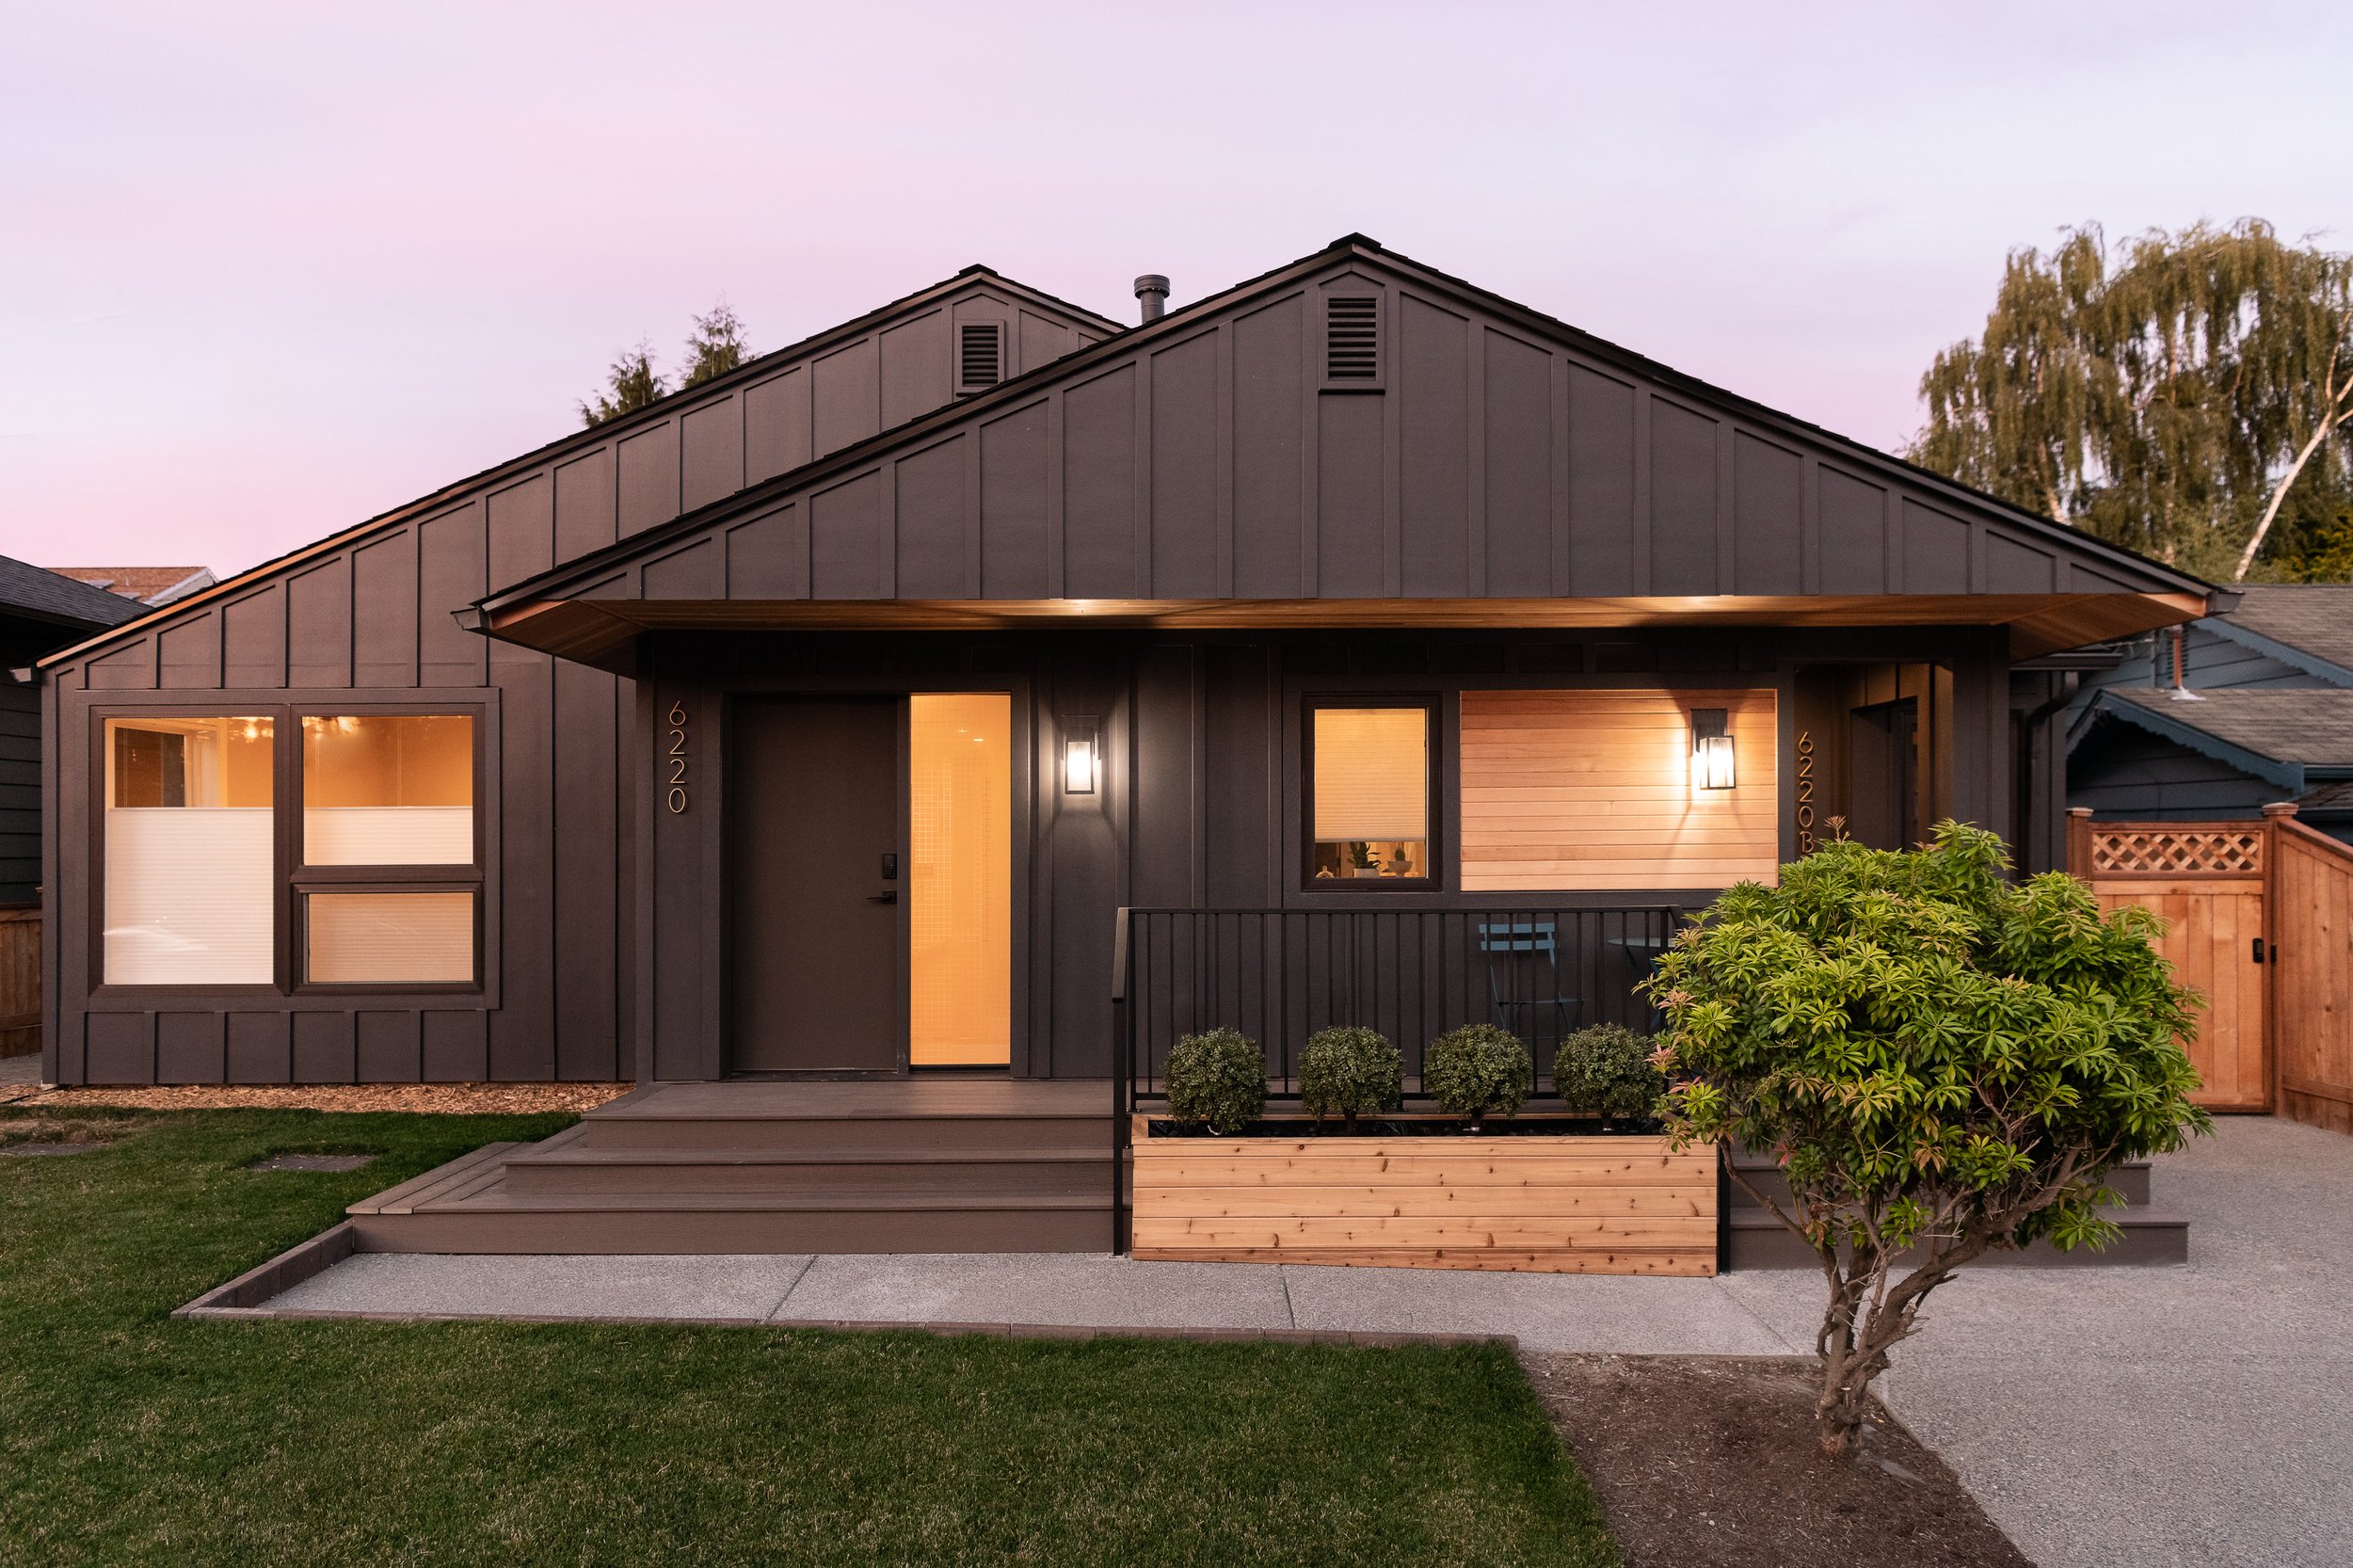  Hawthorne Hills Three achieved a 4-Star Built Green certification by renovating the main home to preserve embodied carbon and maintain healthy trees on site.&nbsp; By turning one living unit into three, this project is an example of how increasing h